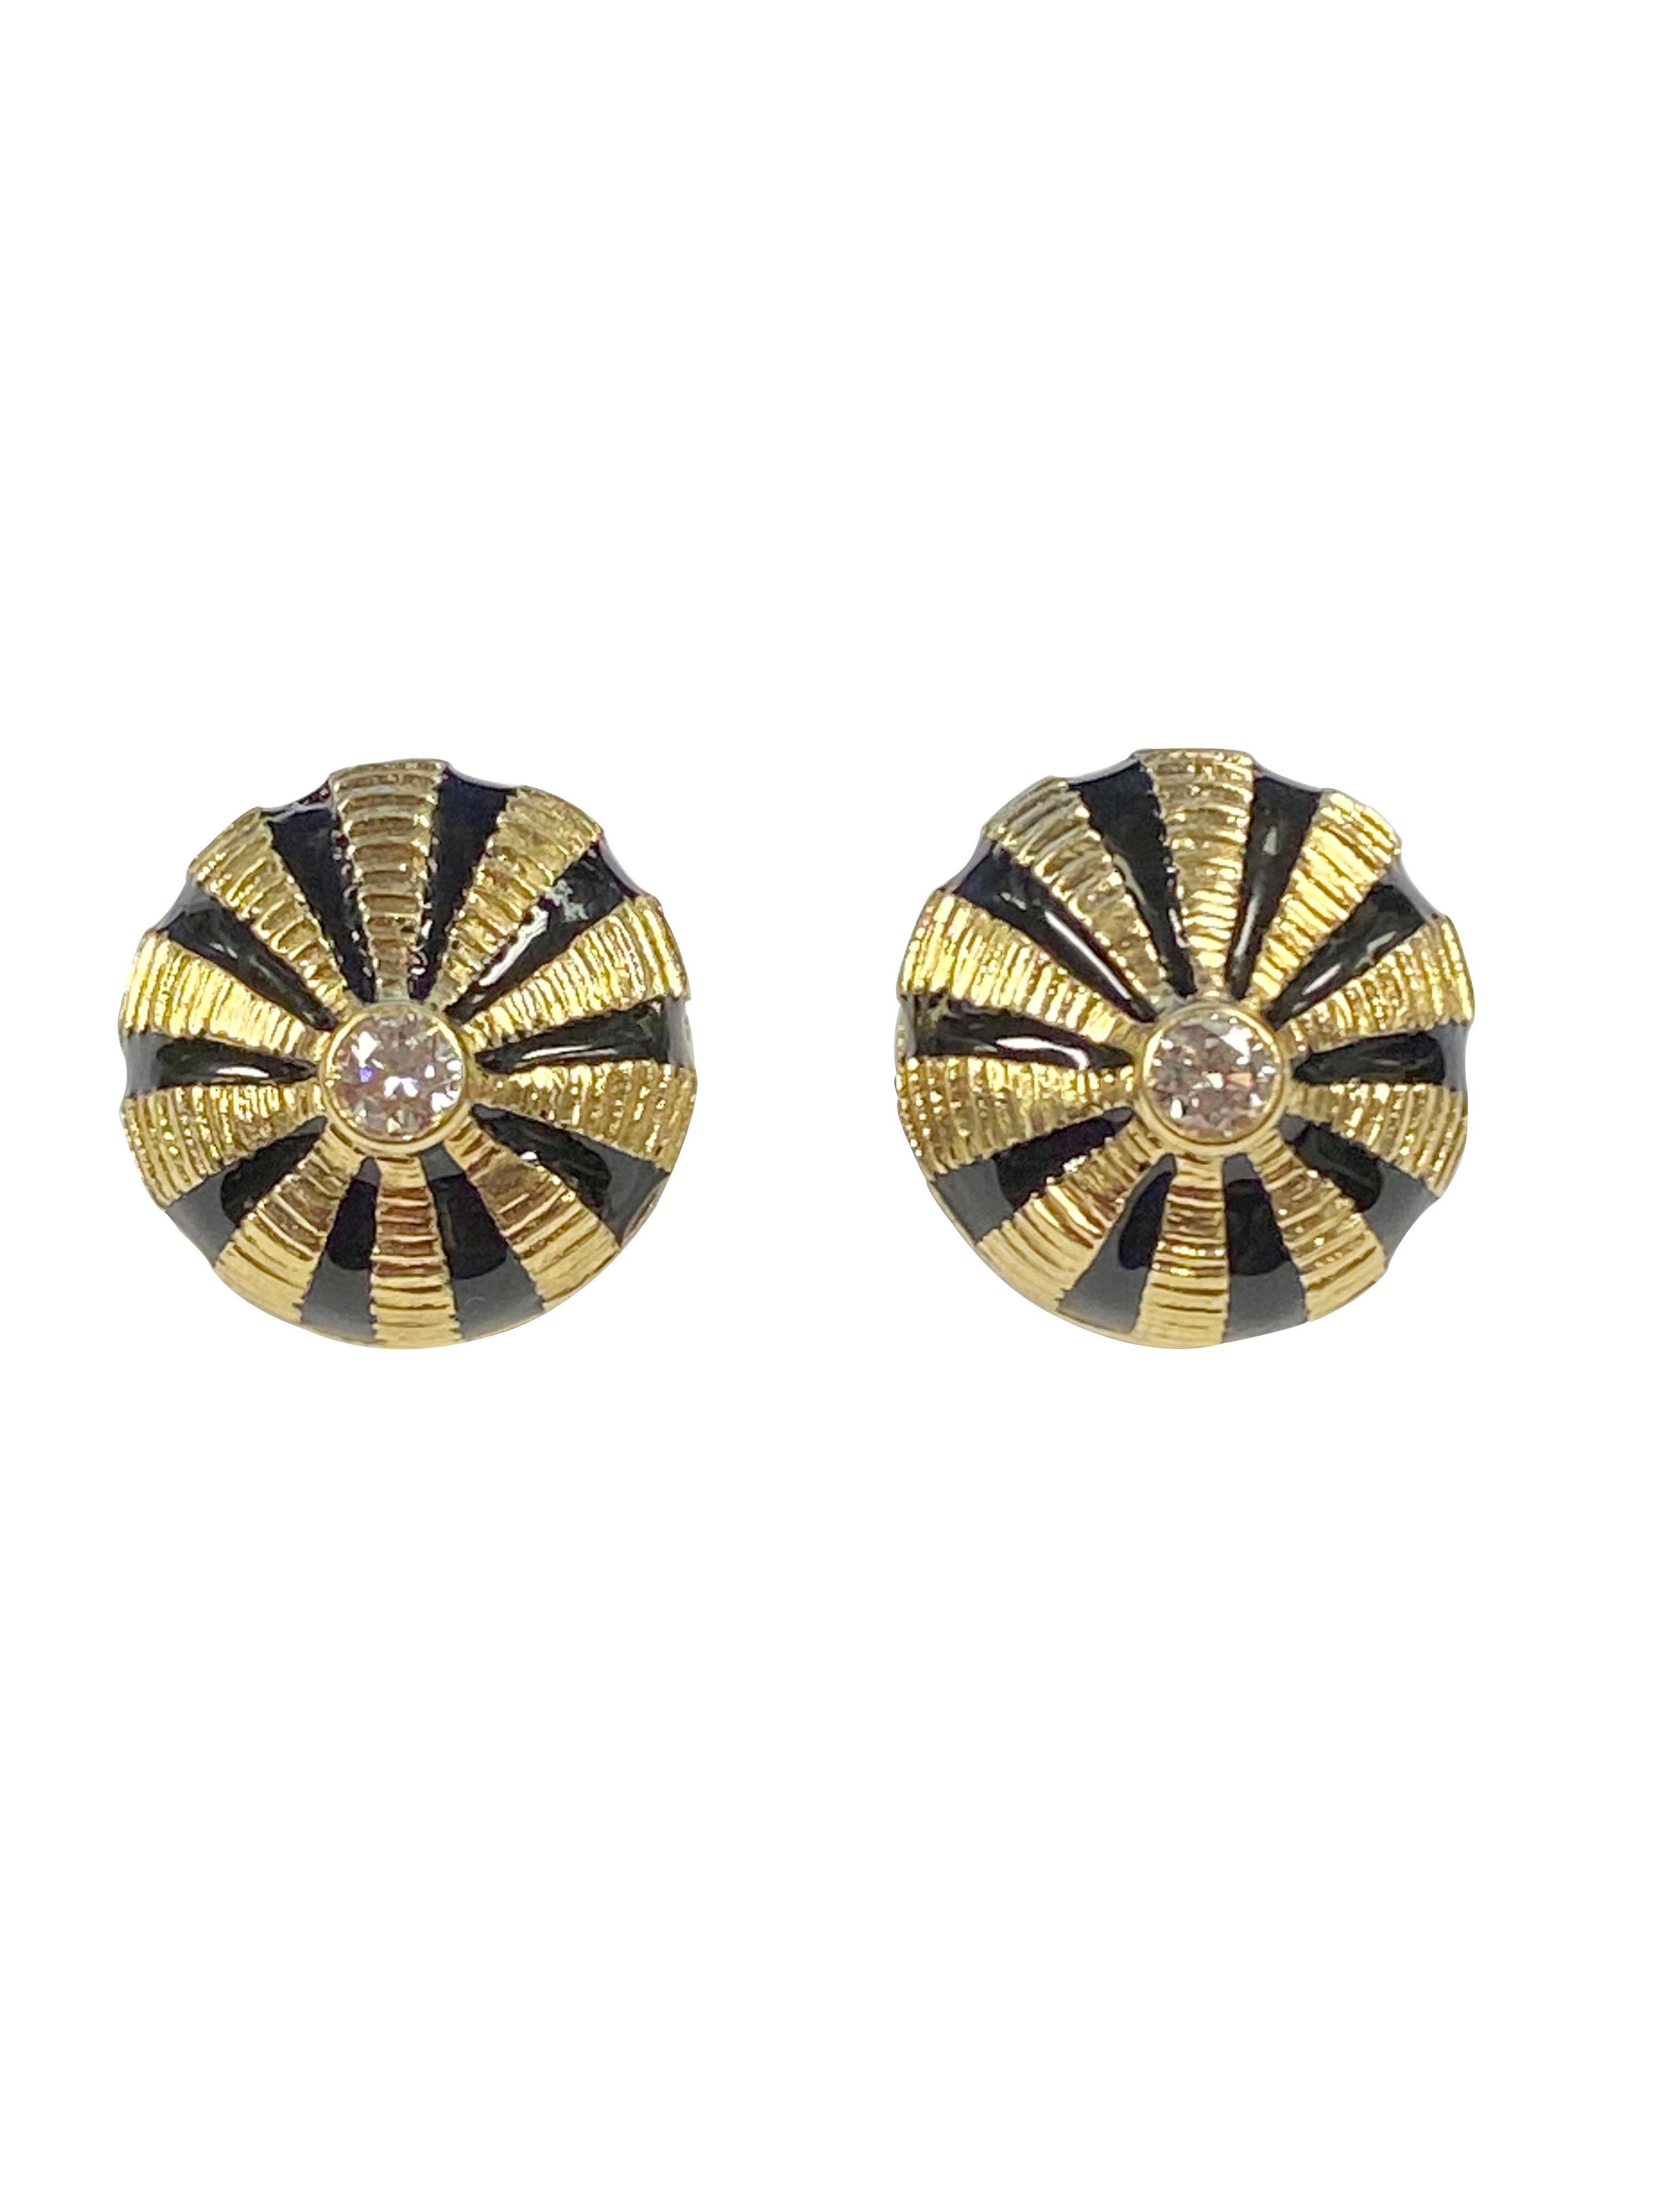 Circa 1990 Jean Schlumberger for Tiffany & Company Earrings, measuring 5/8 inch in diameter and 3/8 inch thick. Scalloped design with Black Enamel and centrally set with a Round Brilliant cut .14 Carat Diamond. .28 Carat for the pair. Omega Clip